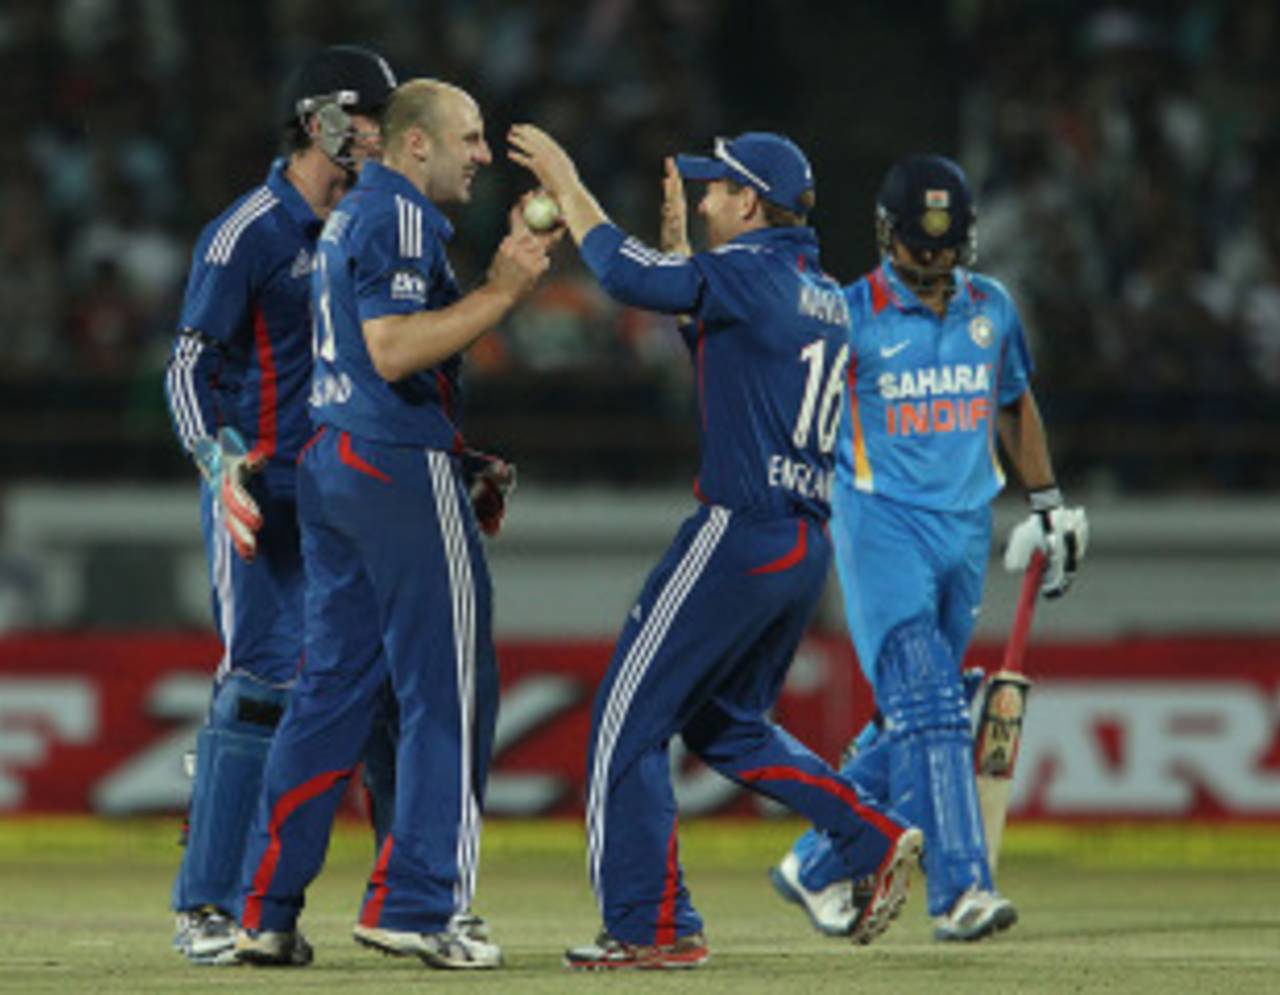 James Tredwell dismissed four of the Indian top five&nbsp;&nbsp;&bull;&nbsp;&nbsp;BCCI